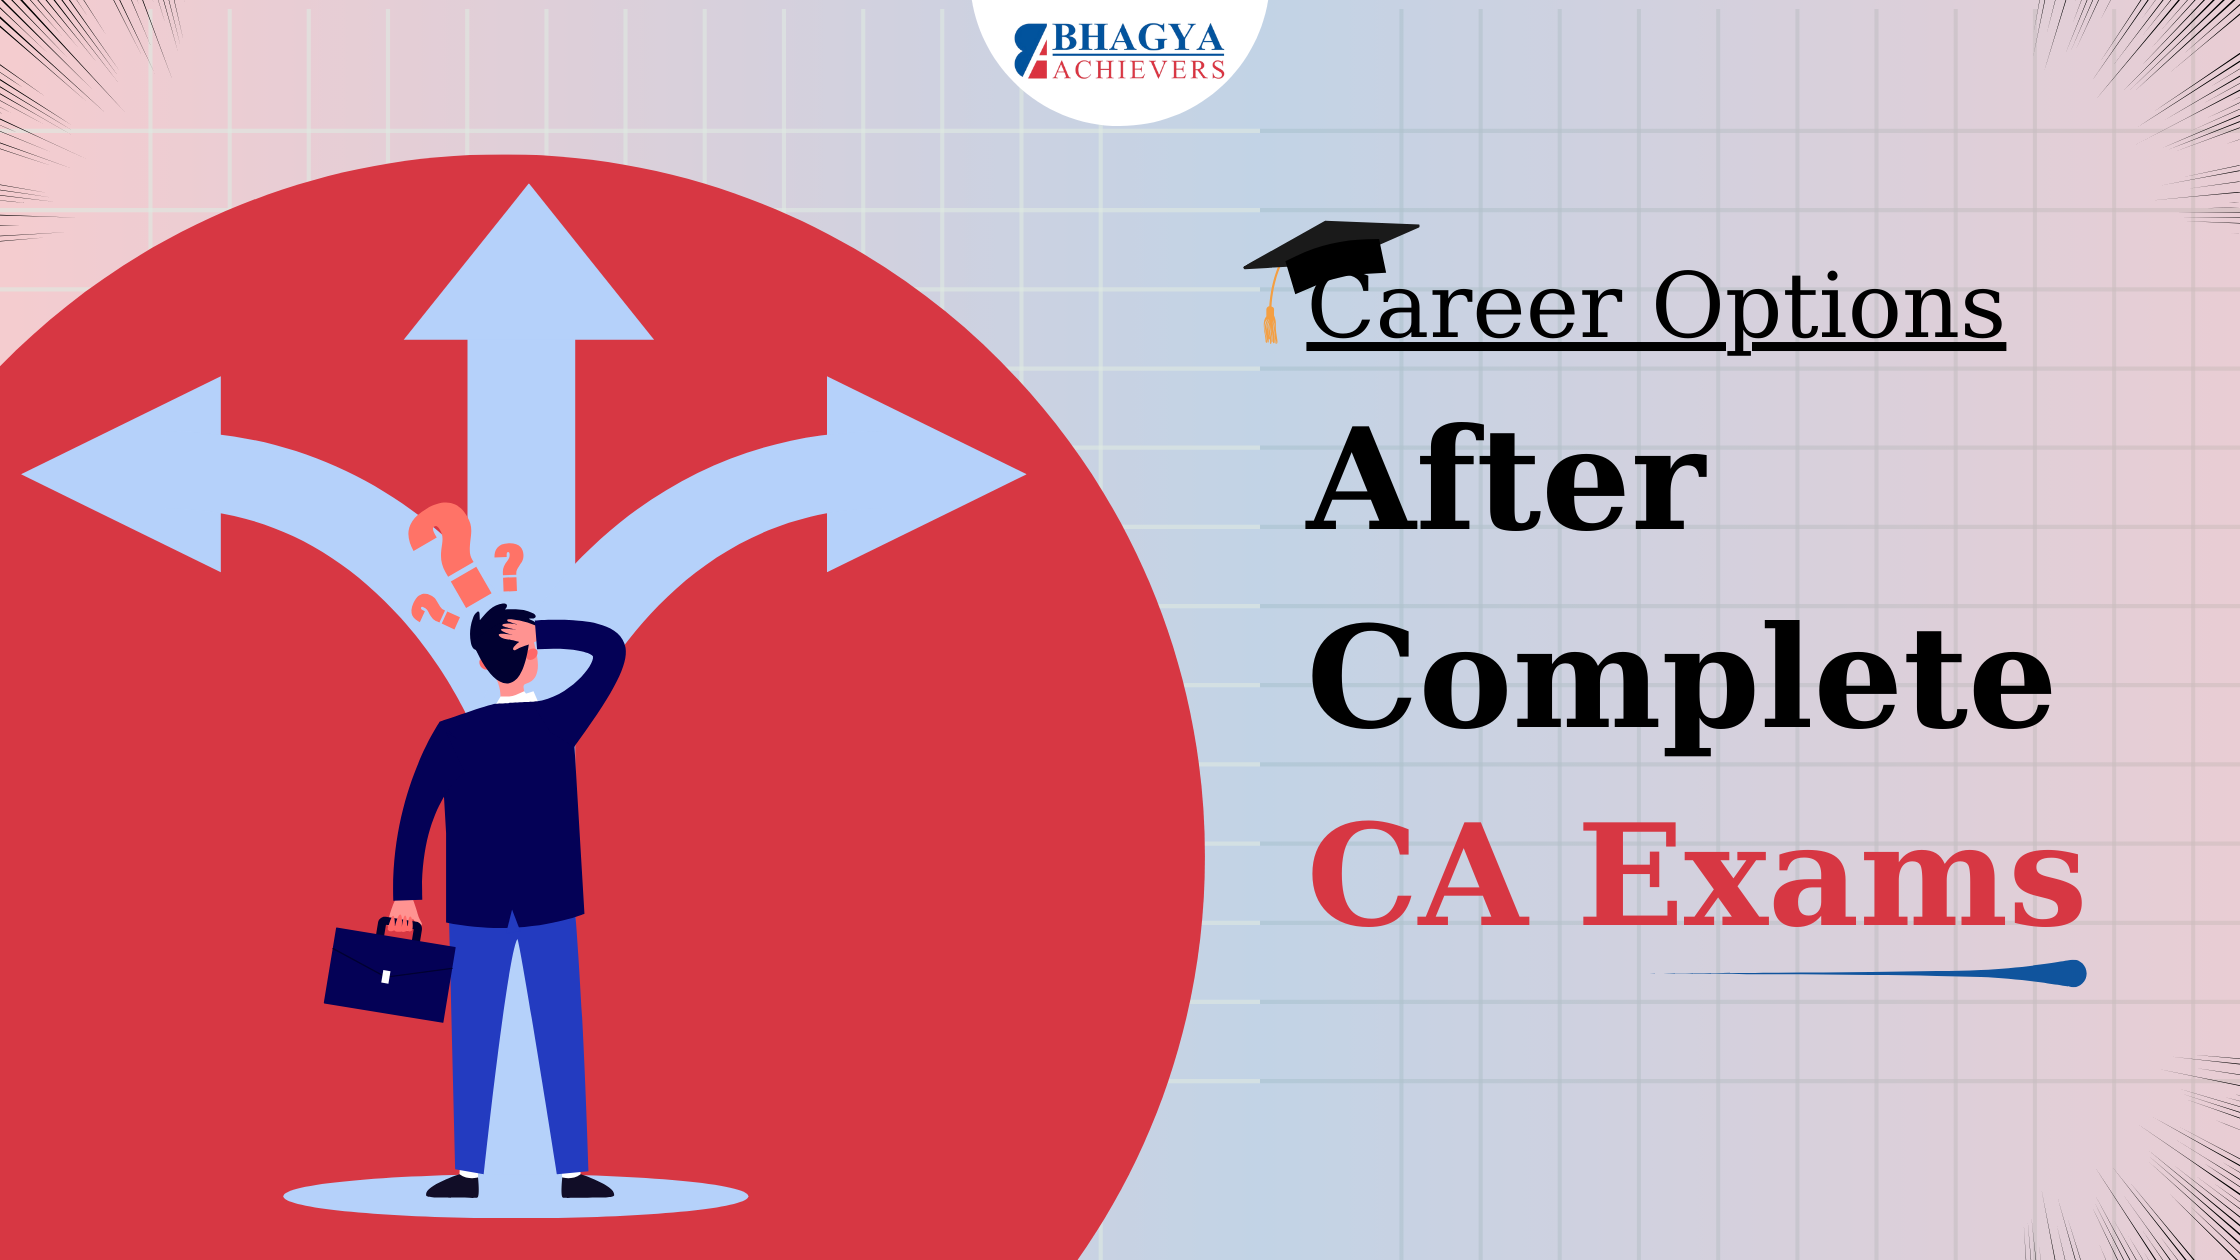 Career Options After Complete CA Exams - Bhagya Achievers